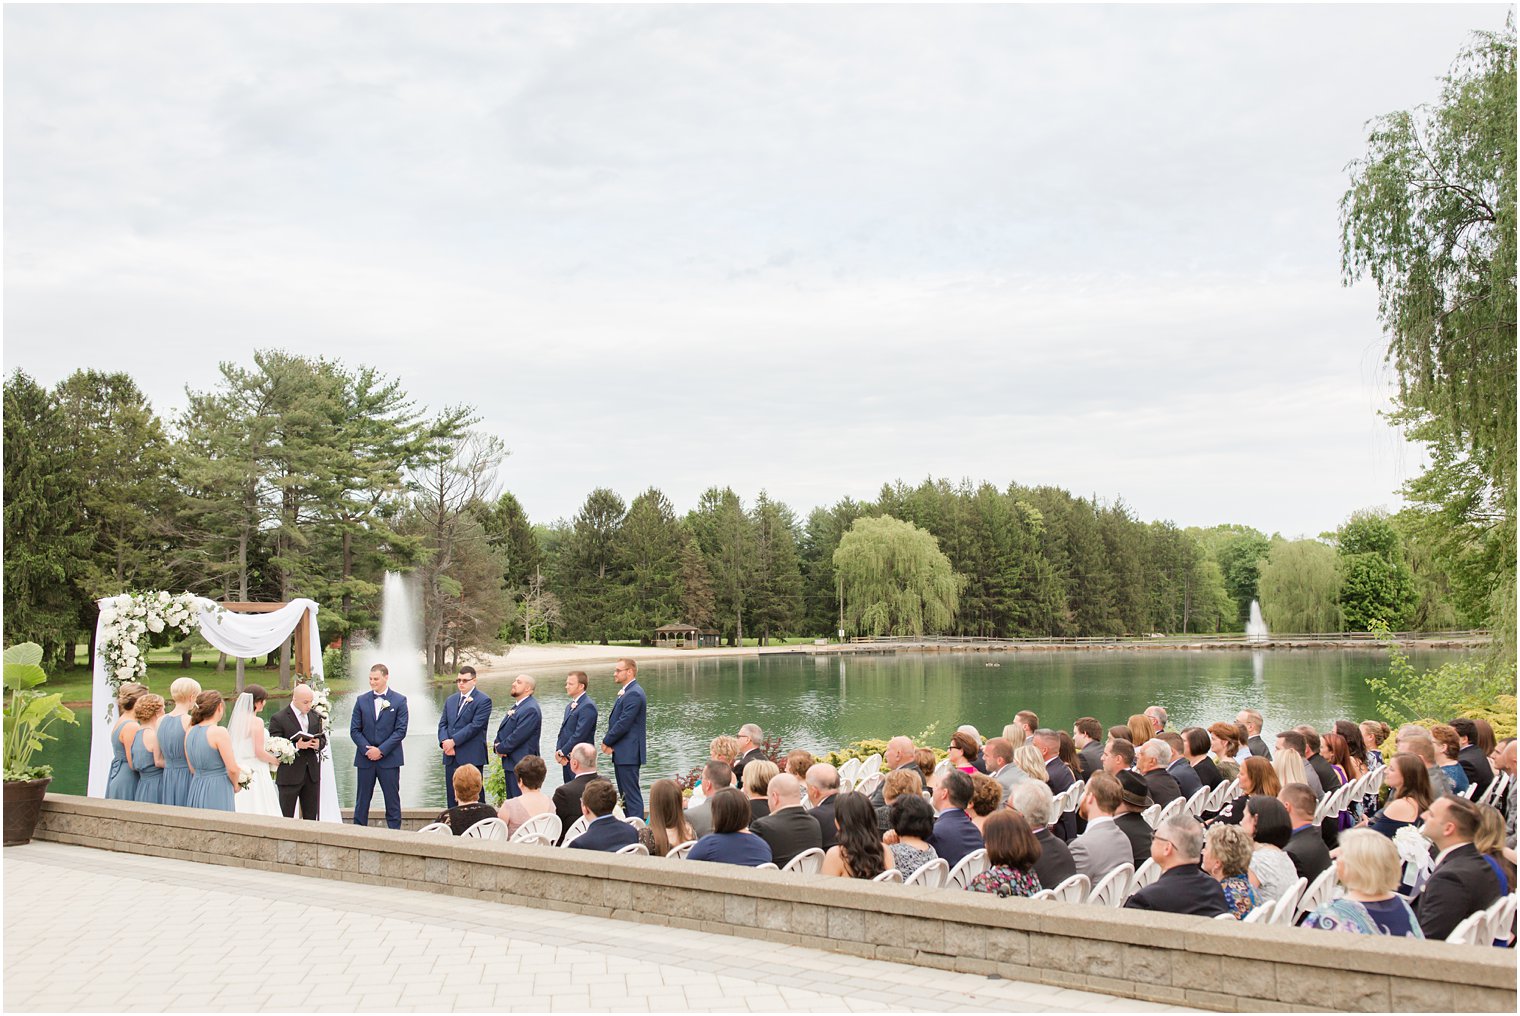 Ceremony location at Windows on the Water at Frogbridge in Millstone NJ